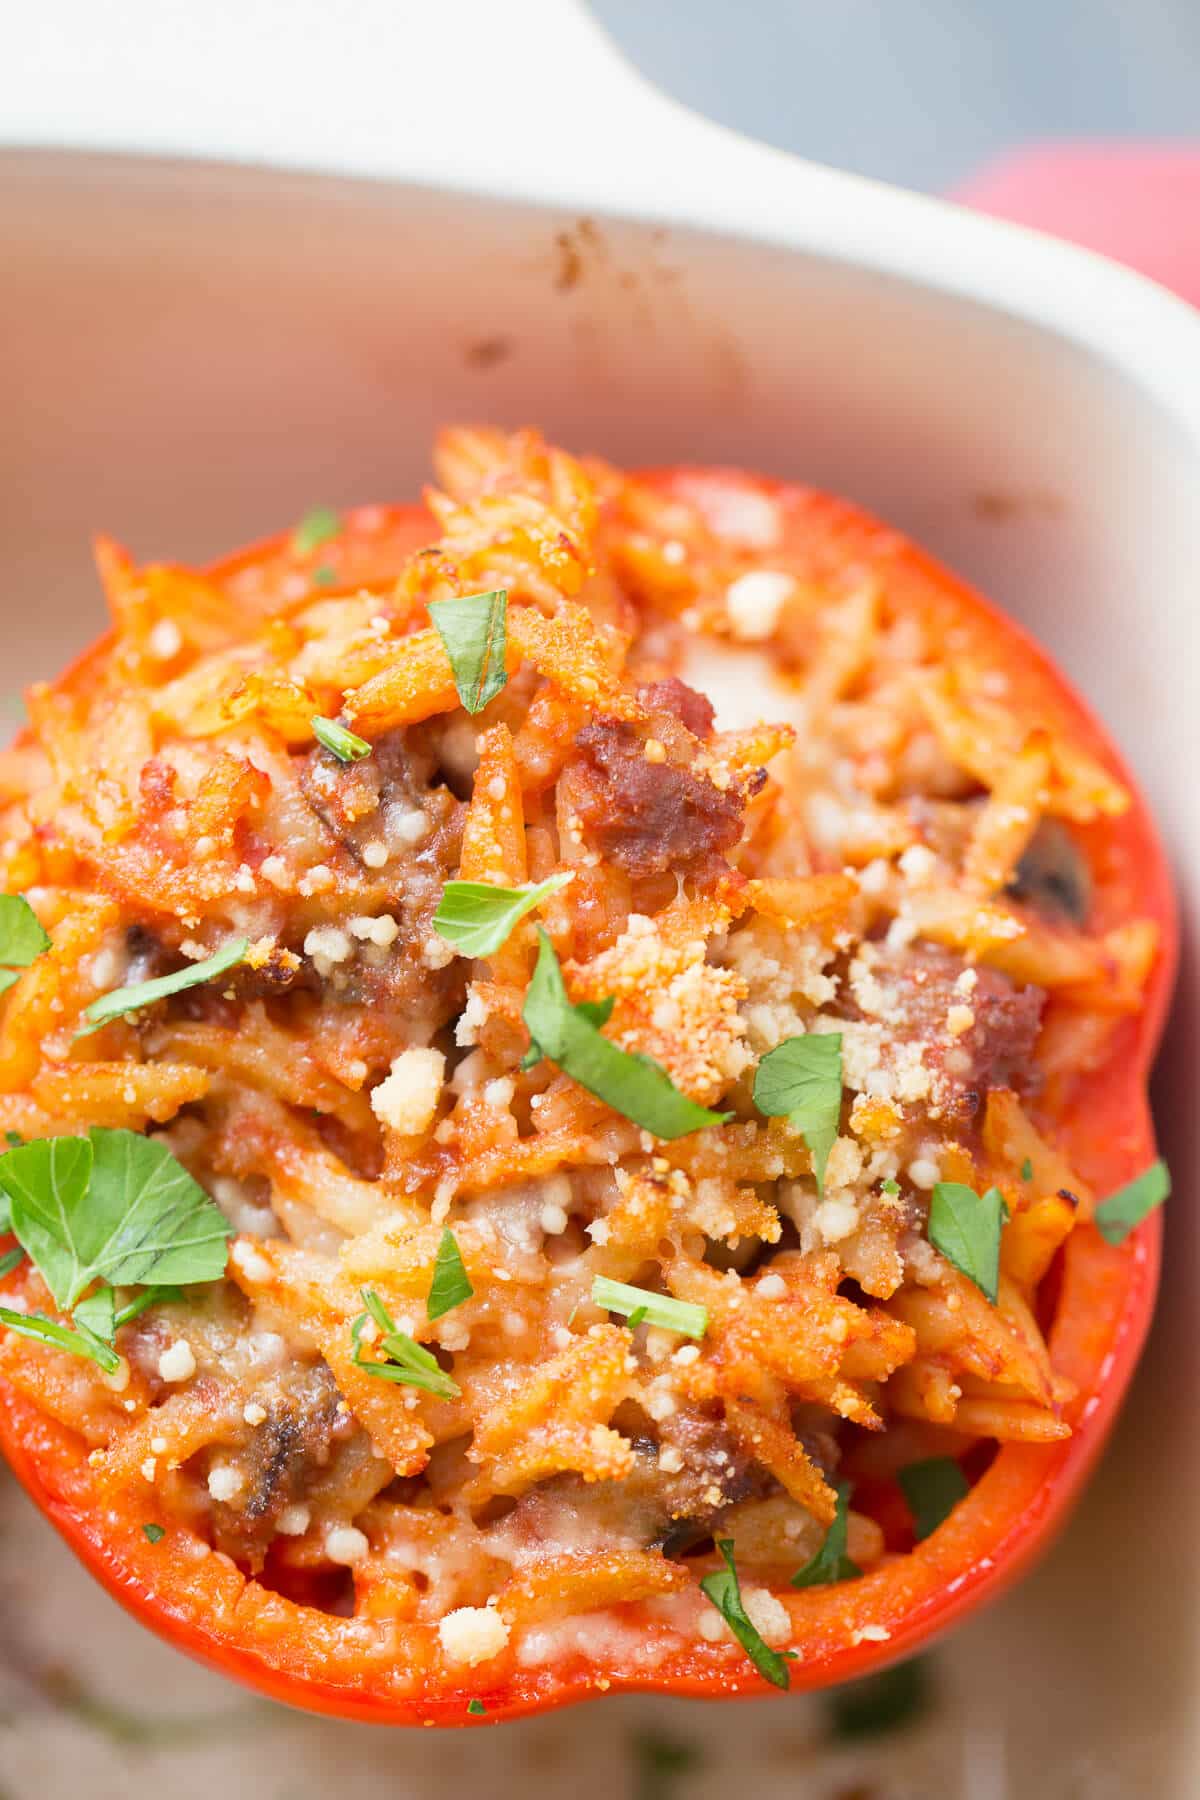 These Italian stuffed peppers are kid-tested and loved by all!